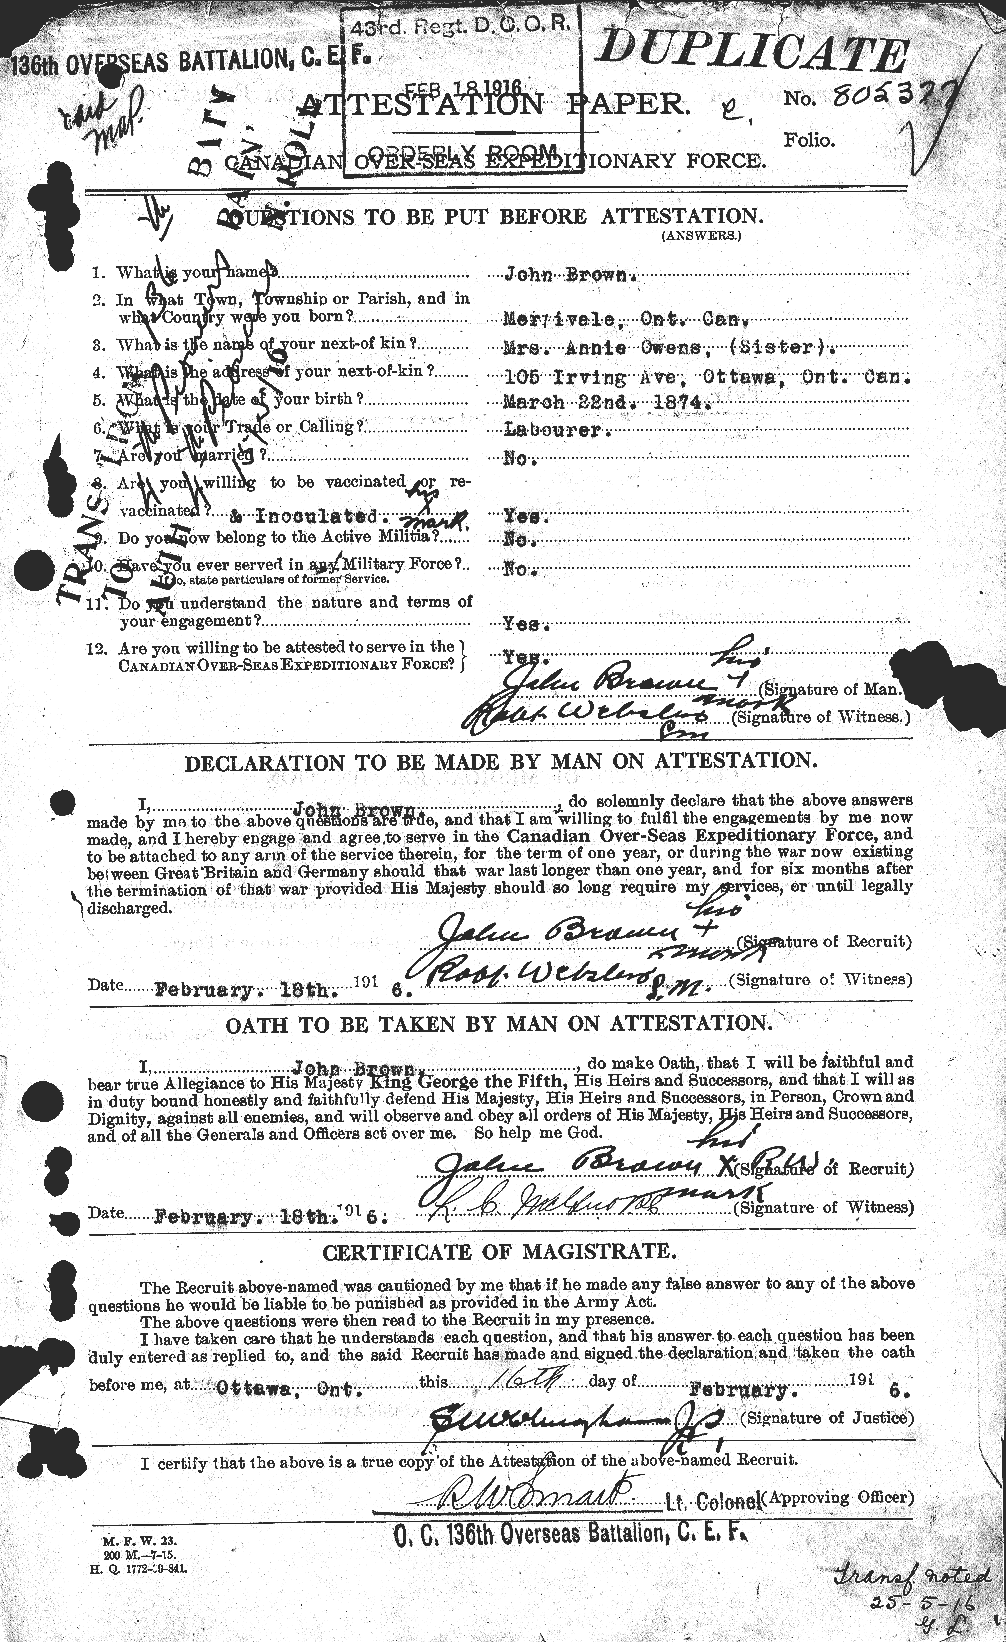 Personnel Records of the First World War - CEF 264538a